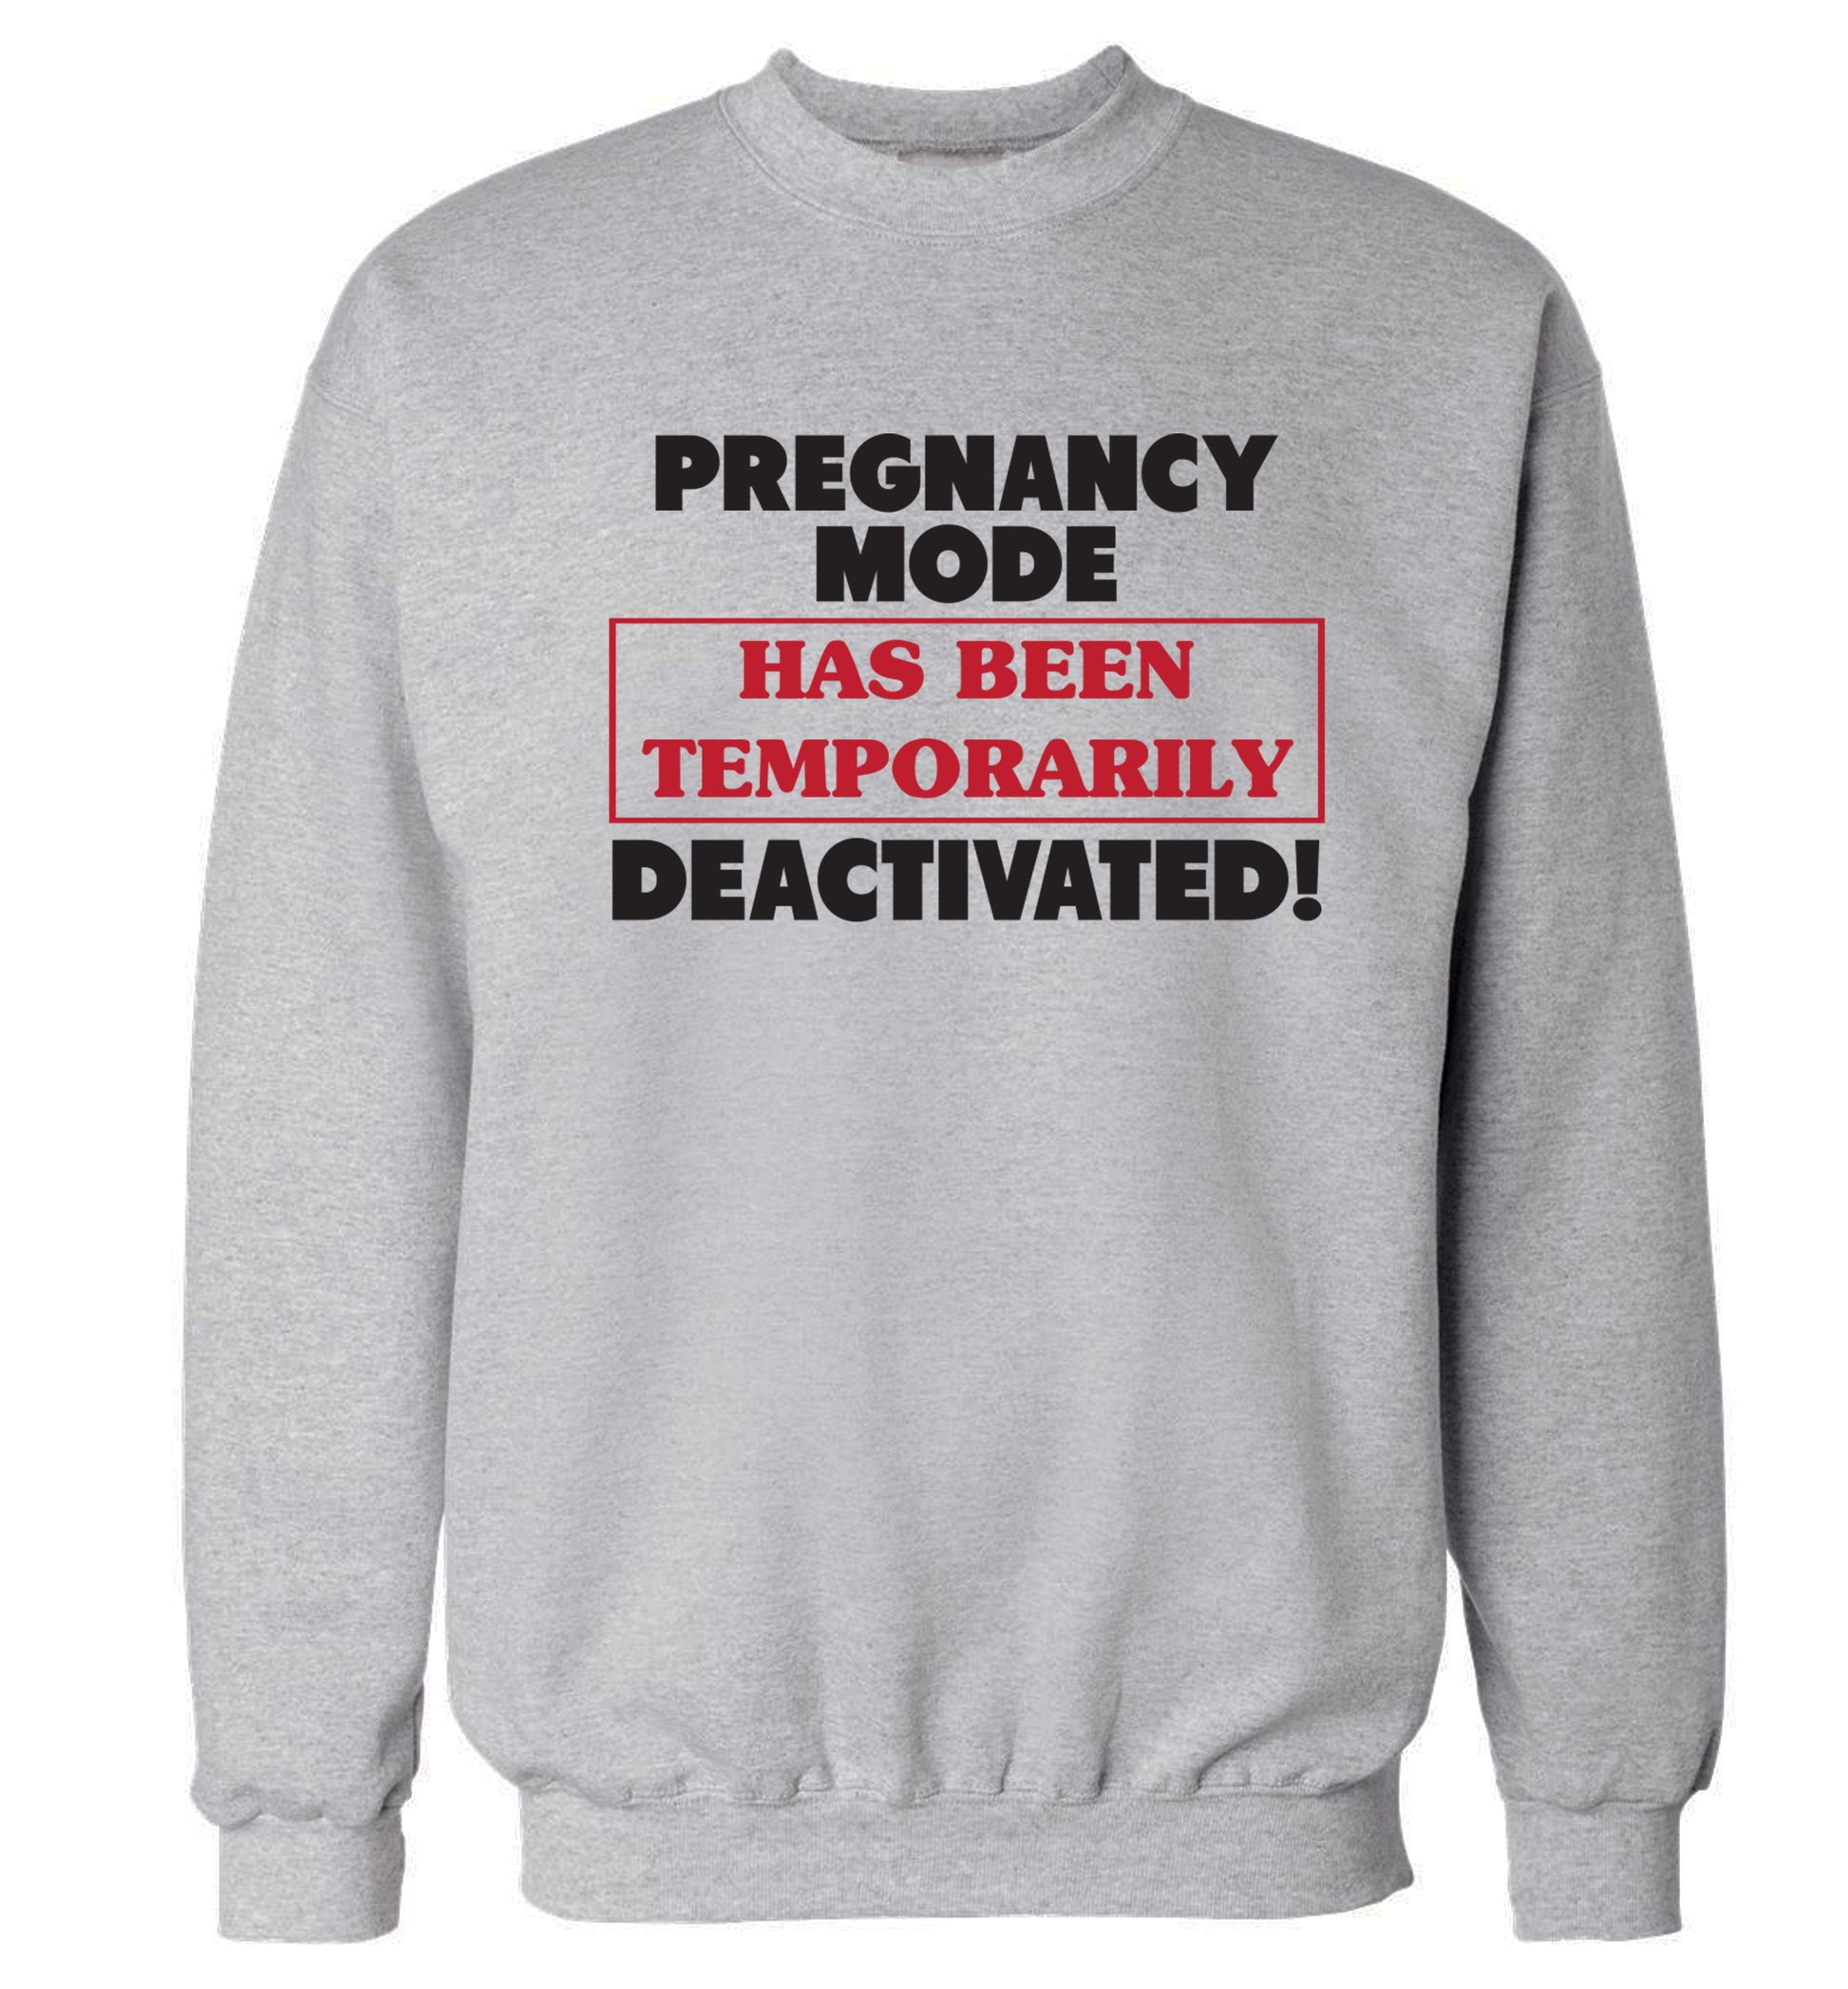 Pregnancy mode has now been temporarily deactivated Adult's unisex grey Sweater 2XL